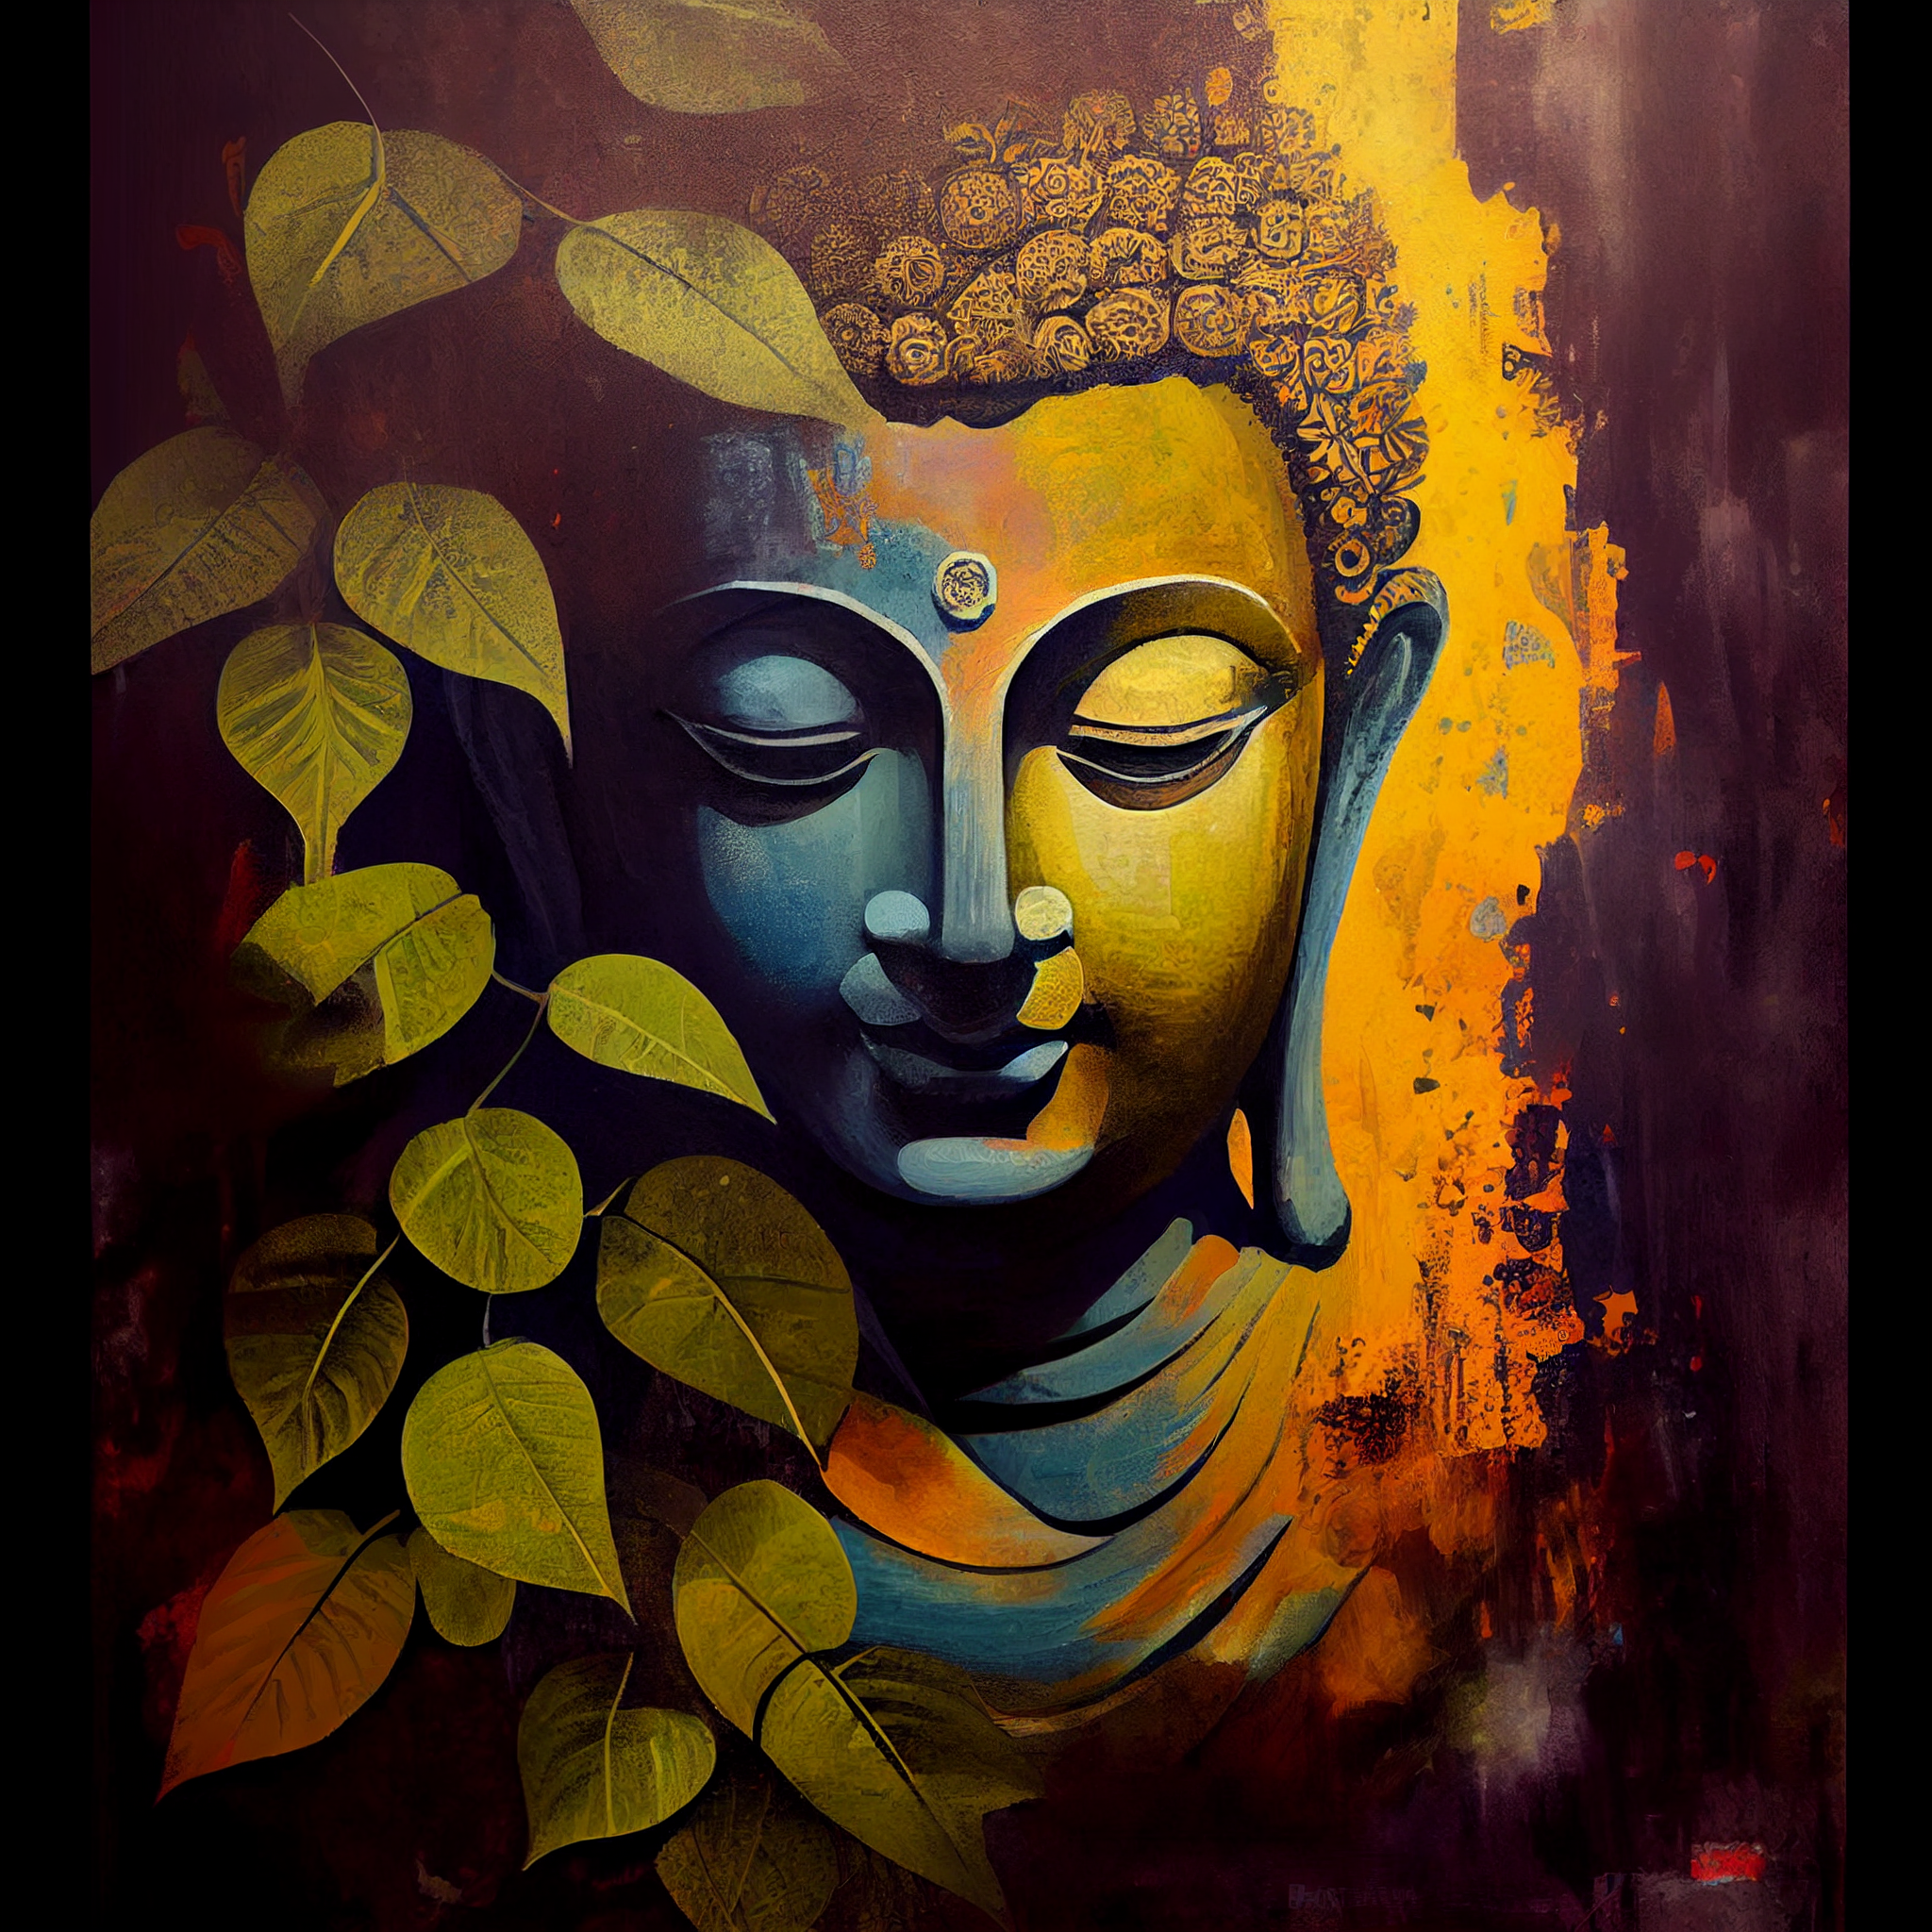 Buddha's Serenity: A Modern Oil Color Print of Lord Buddha's Face with Leaf-like Structures in the Background